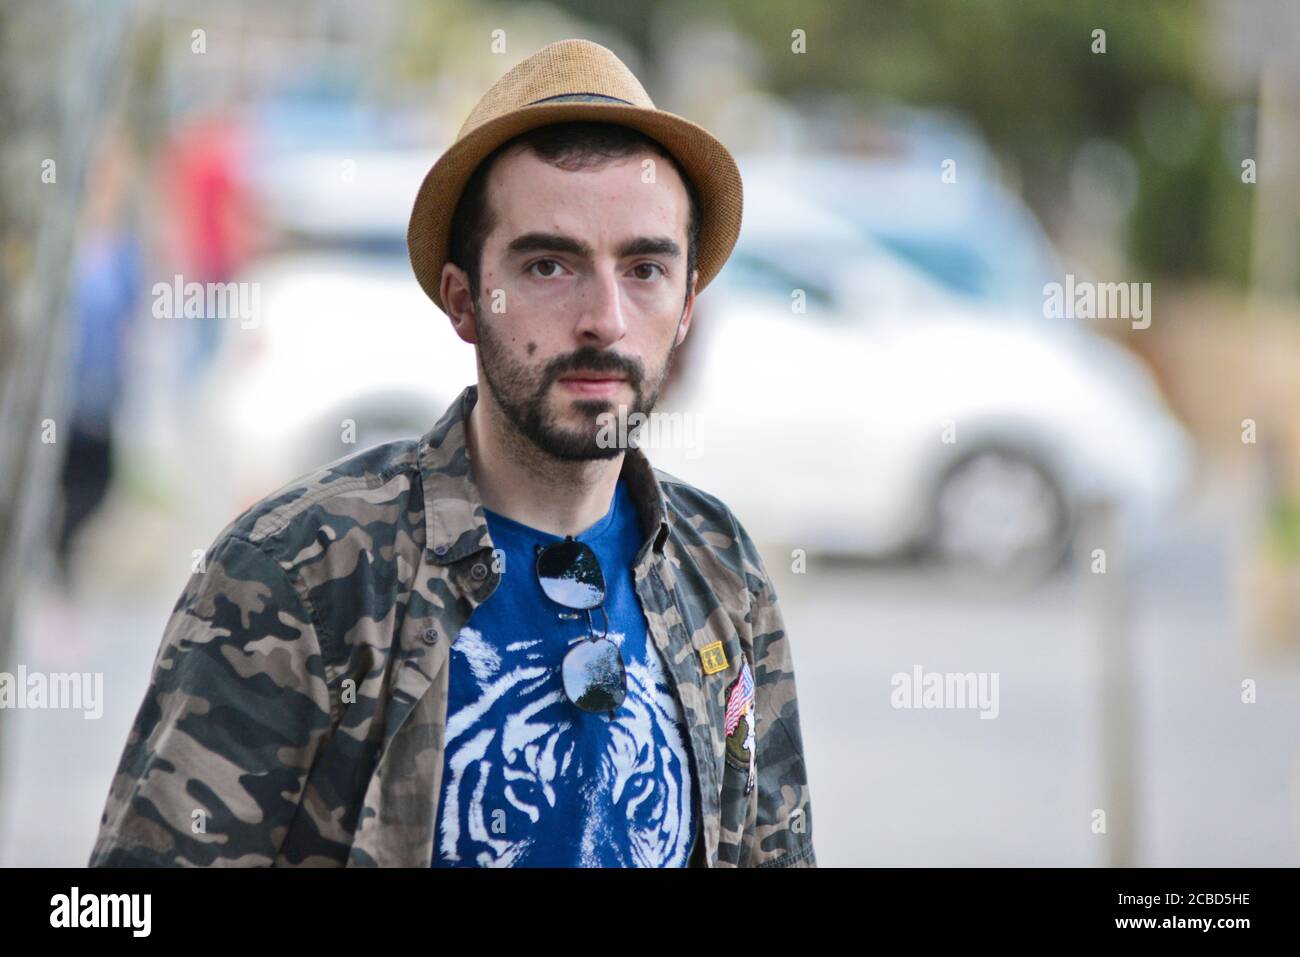 Ypung man wearing a hat in Didube bus station, Tbilisi, Republic of Georgia Stock Photo